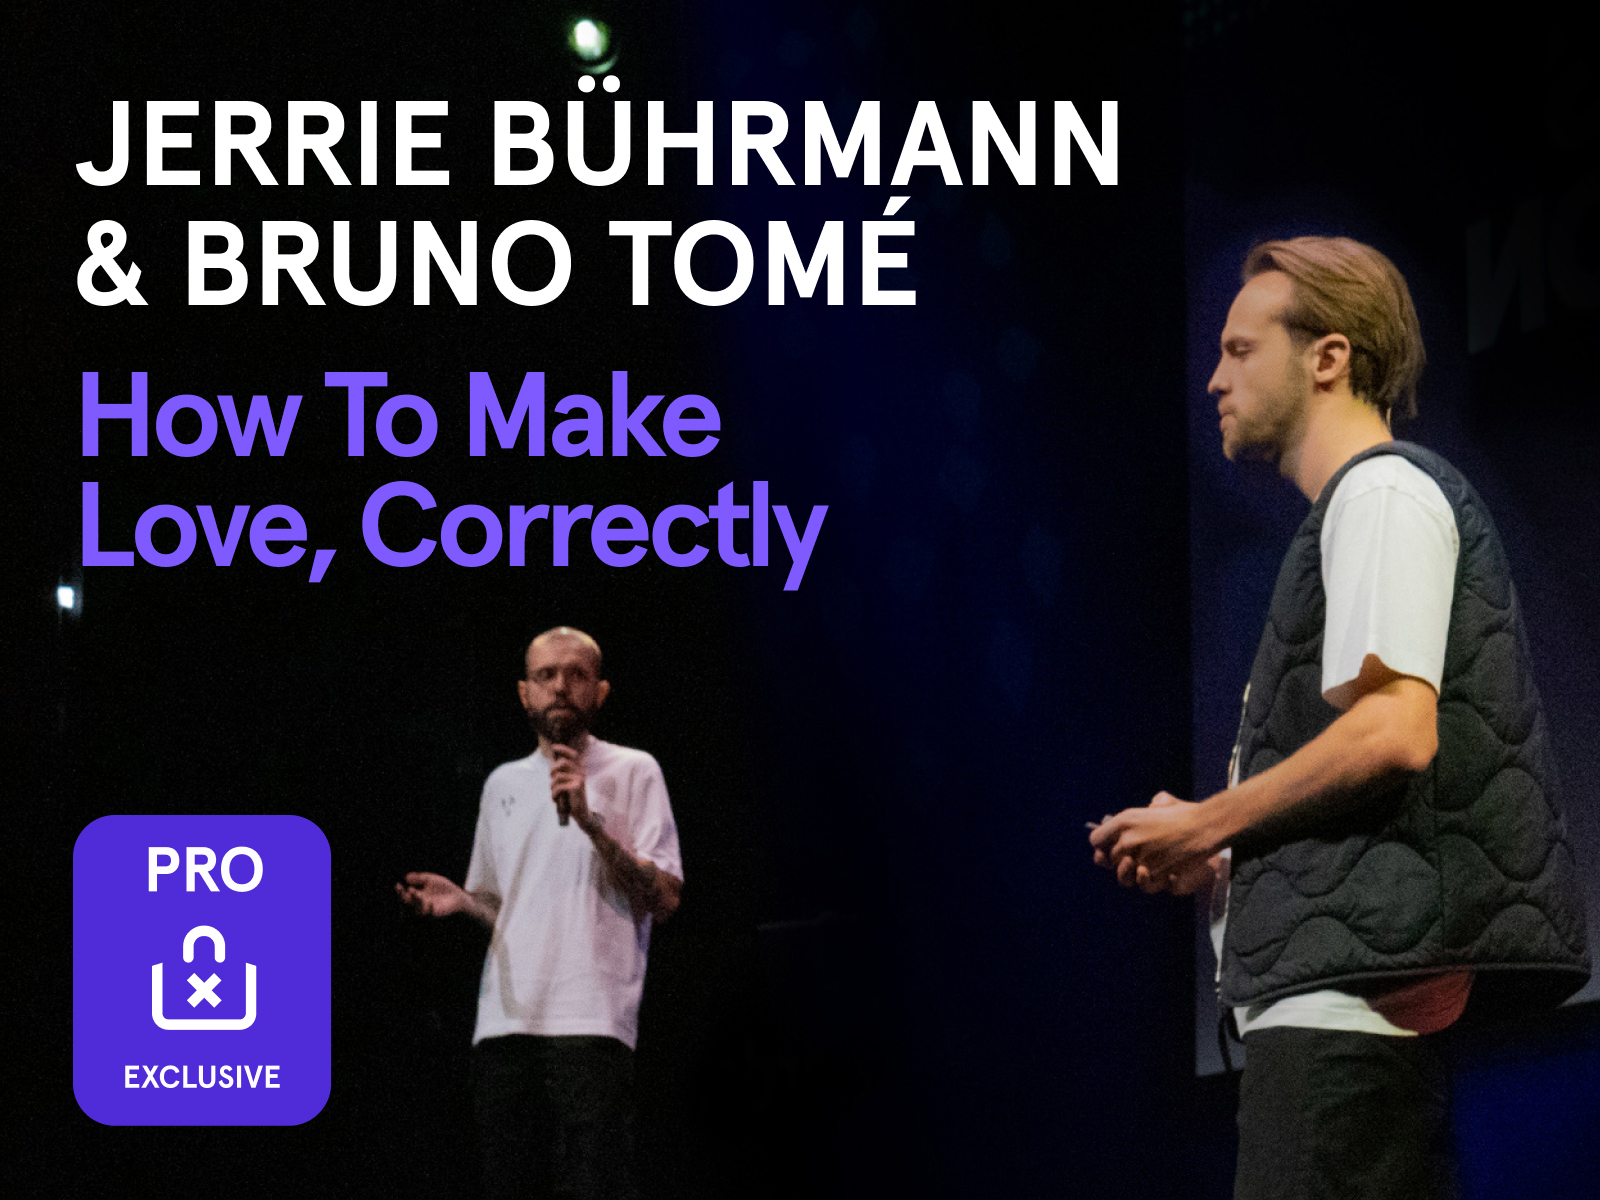 New PRO Content available: watch Jerrie Buhrmann & Bruno Tome's new talk from Awwwards Conference Amsterdam